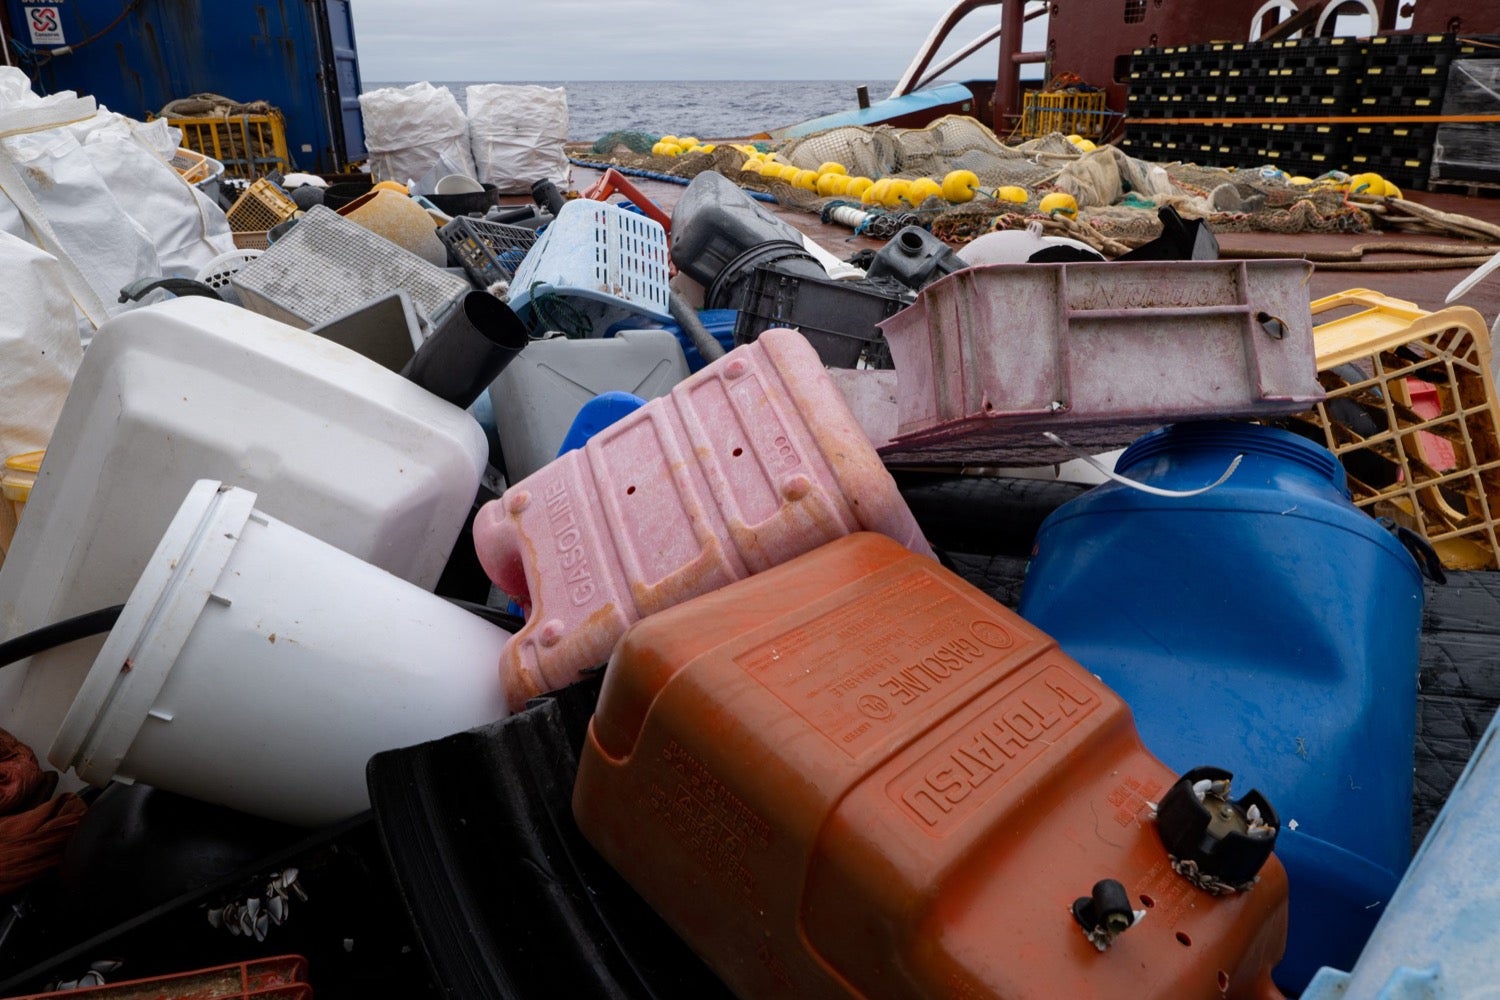 a pile of plastic crates, gasoline boxes, and other debris